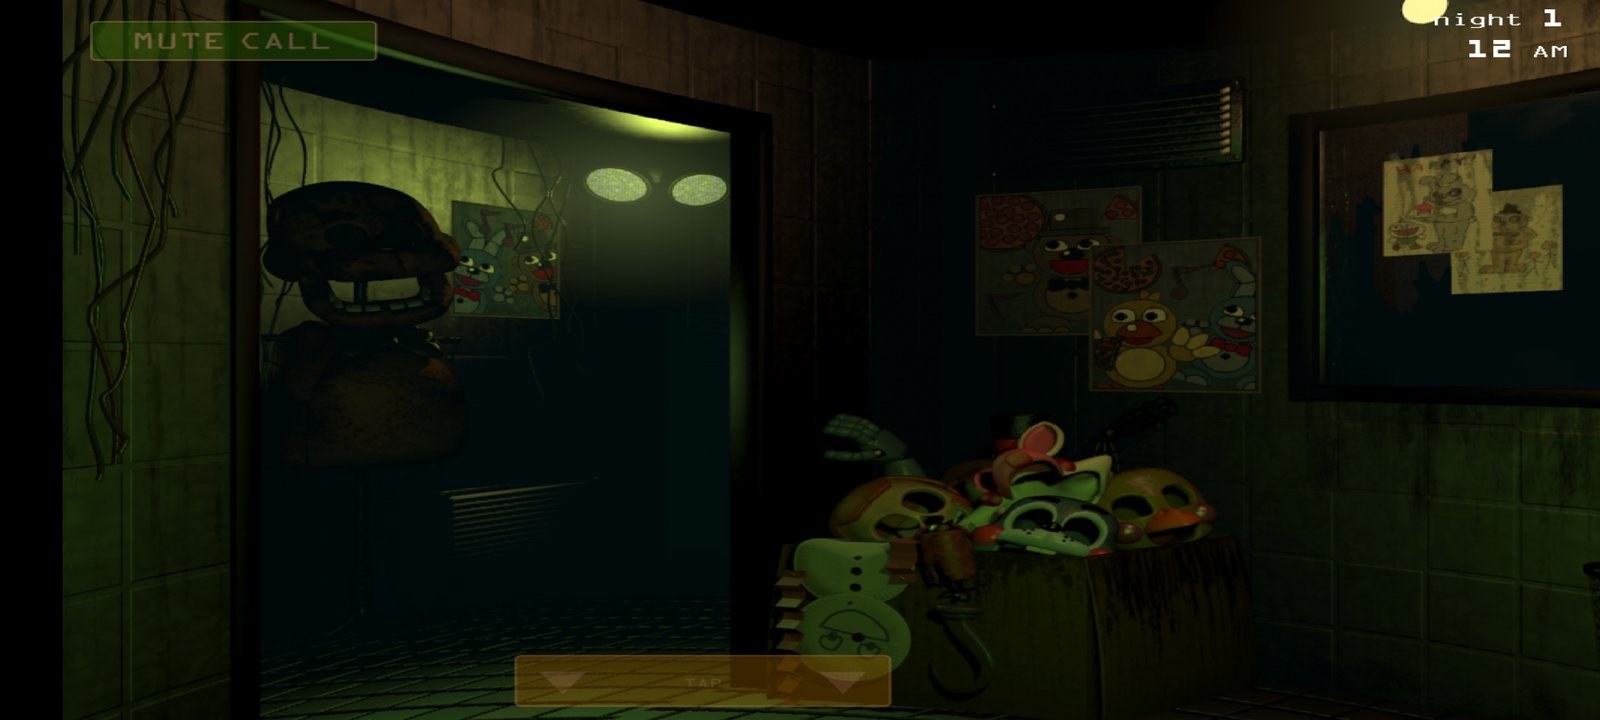 Download Five Nights at Freddy's 2 (MOD, Unlocked) 2.0.4 APK for android